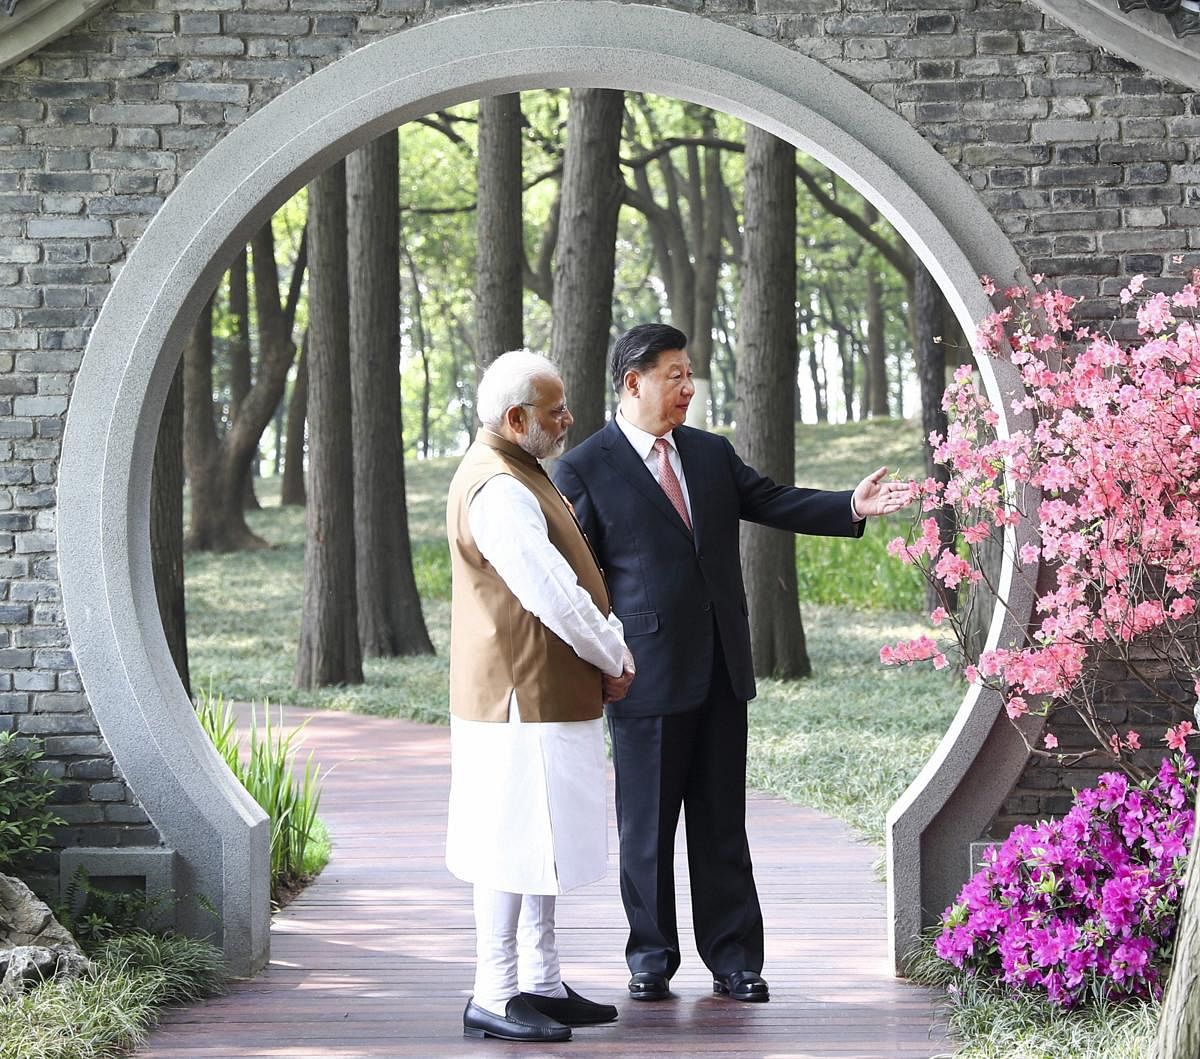 WUHAN: In this photo released by China's Xinhua News Agency, Indian Prime Minister Narendra Modi, left, and Chinese President Xi Jinping talk at a garden in Wuhan in central China's Hubei Province, Saturday, April 28, 2018. The leaders of China and India